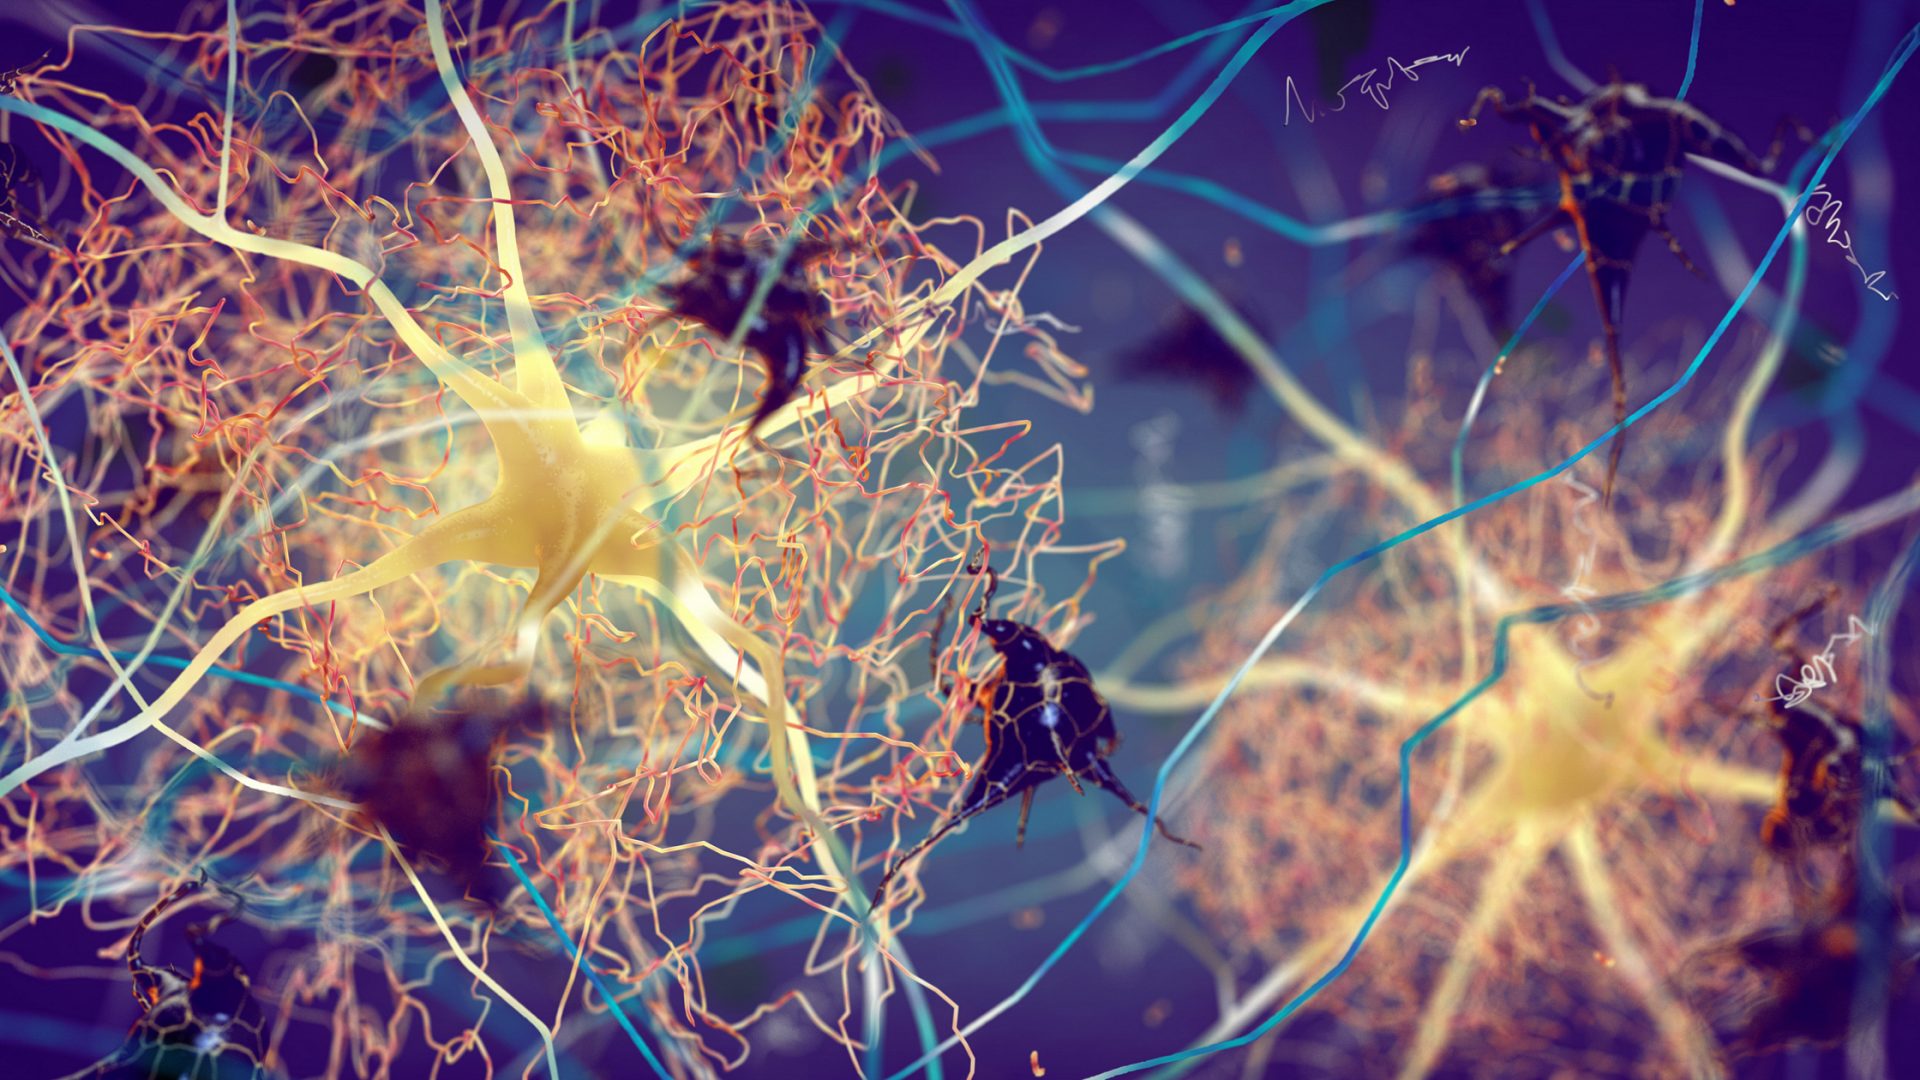 Artist’s rendering of Beta-amyloid protein disrupting nerve cells function in a brain with Alzheimer's disease